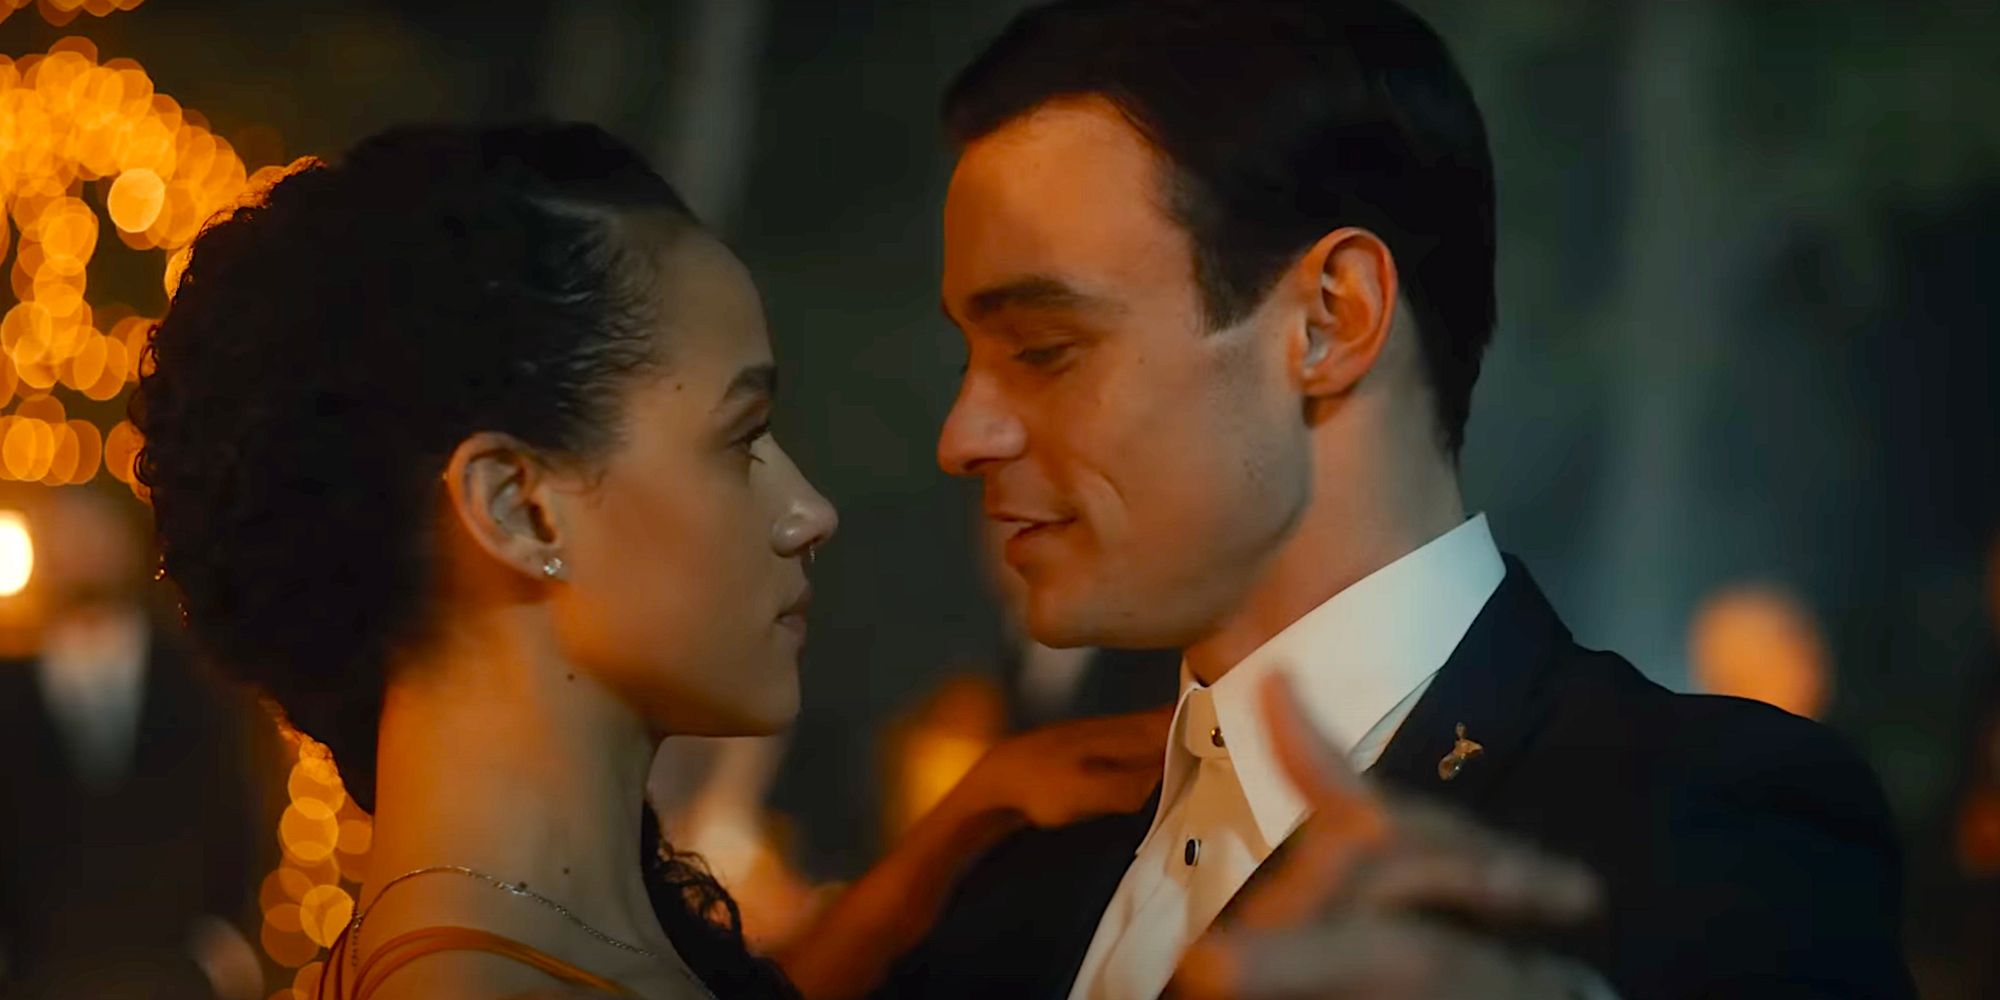 Nathalie Emmanuel as Evie and Thomas Doherty as Walt dancing in 2022's The Invitation